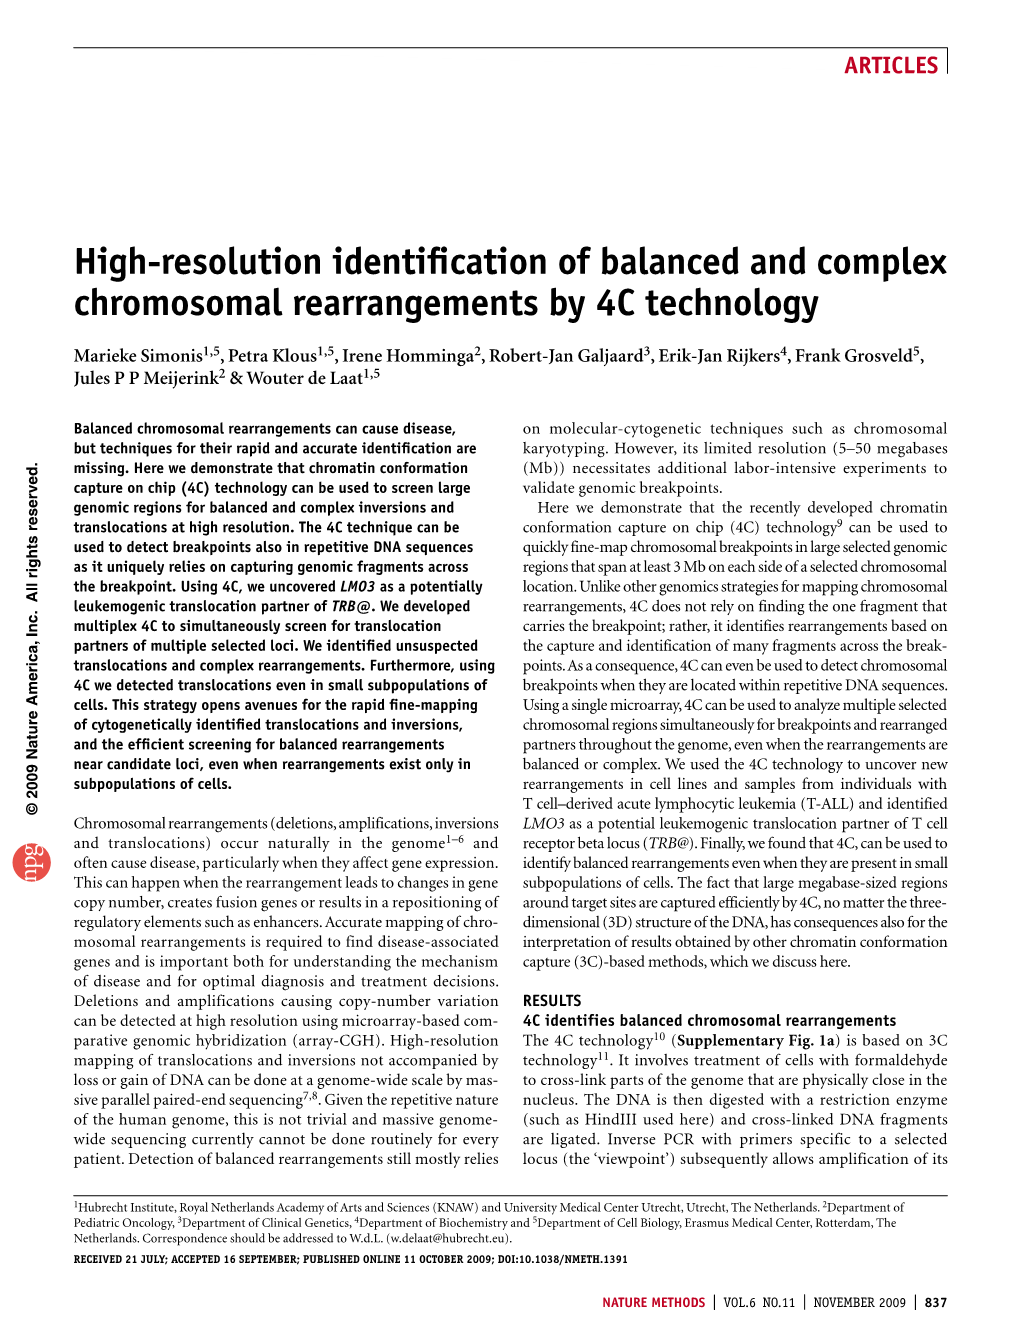 High-Resolution Identification of Balanced and Complex Chromosomal Rearrangements by 4C Technology